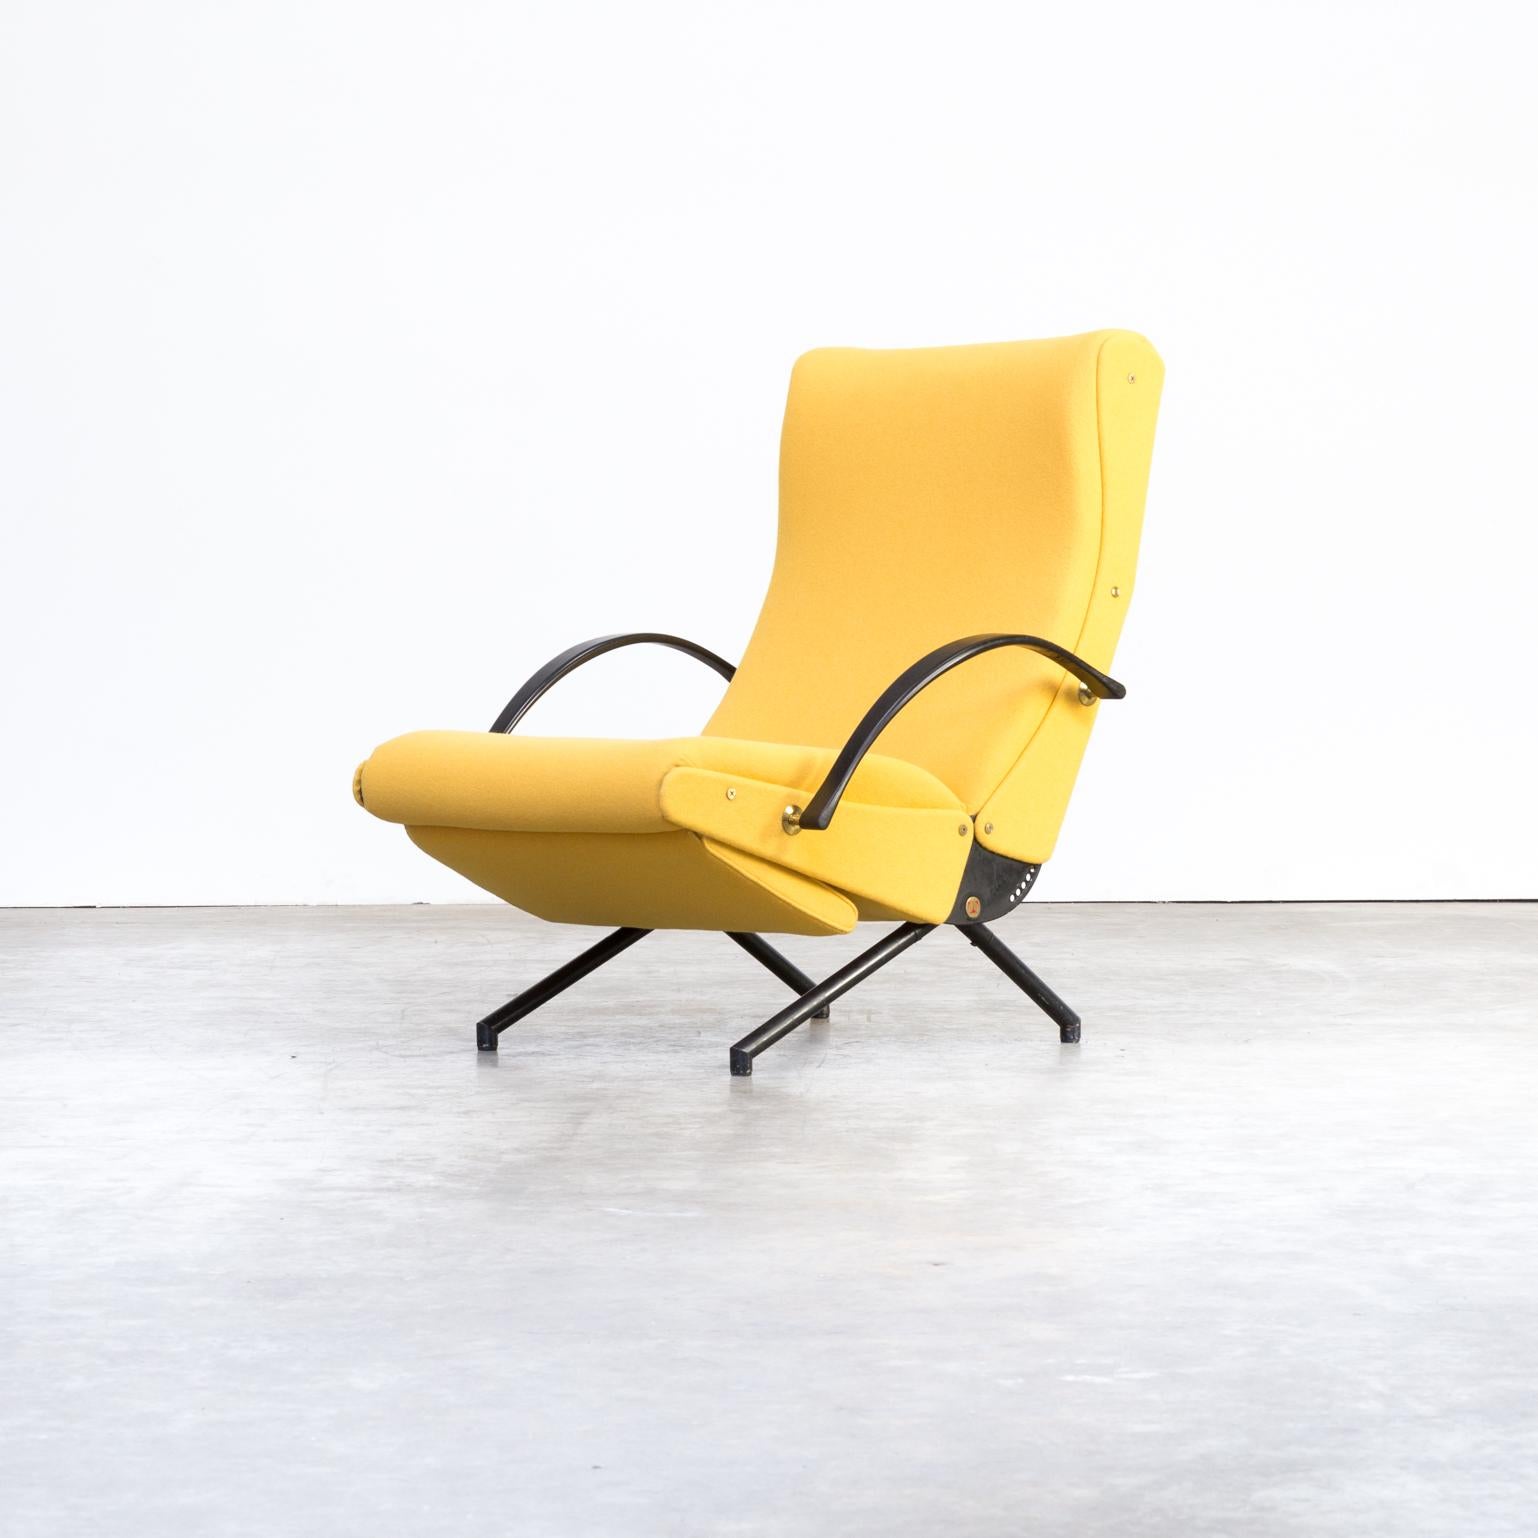 1950s 1st edition Osvaldo Borsani ‘P40’ louge chair for Tecno. High quality restored with beautiful new upholstery.